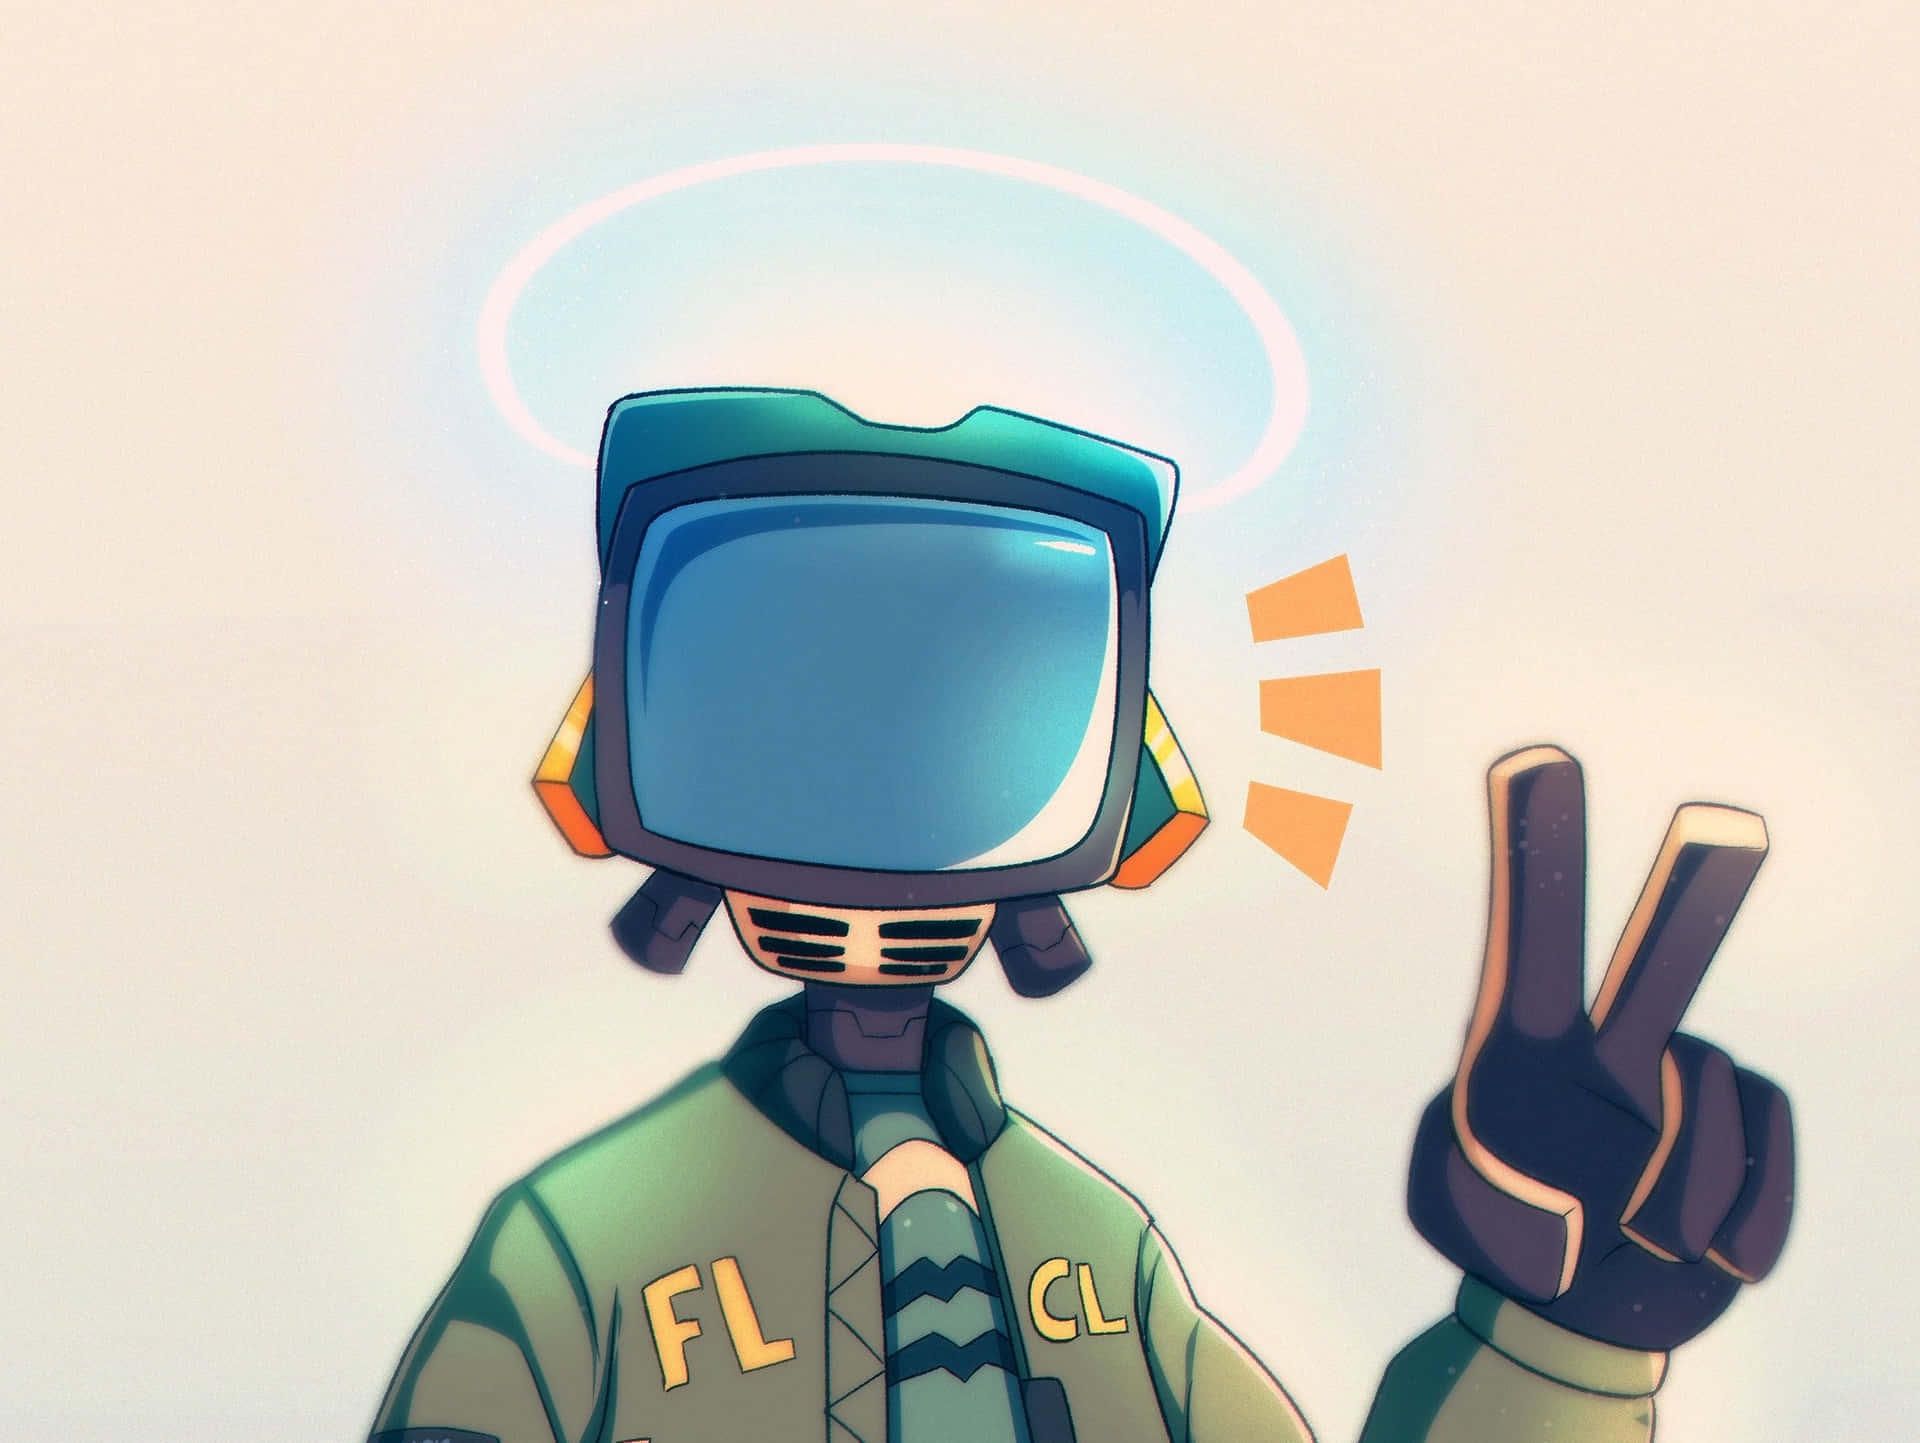 Canti standing tall amidst a hazy background Wallpaper